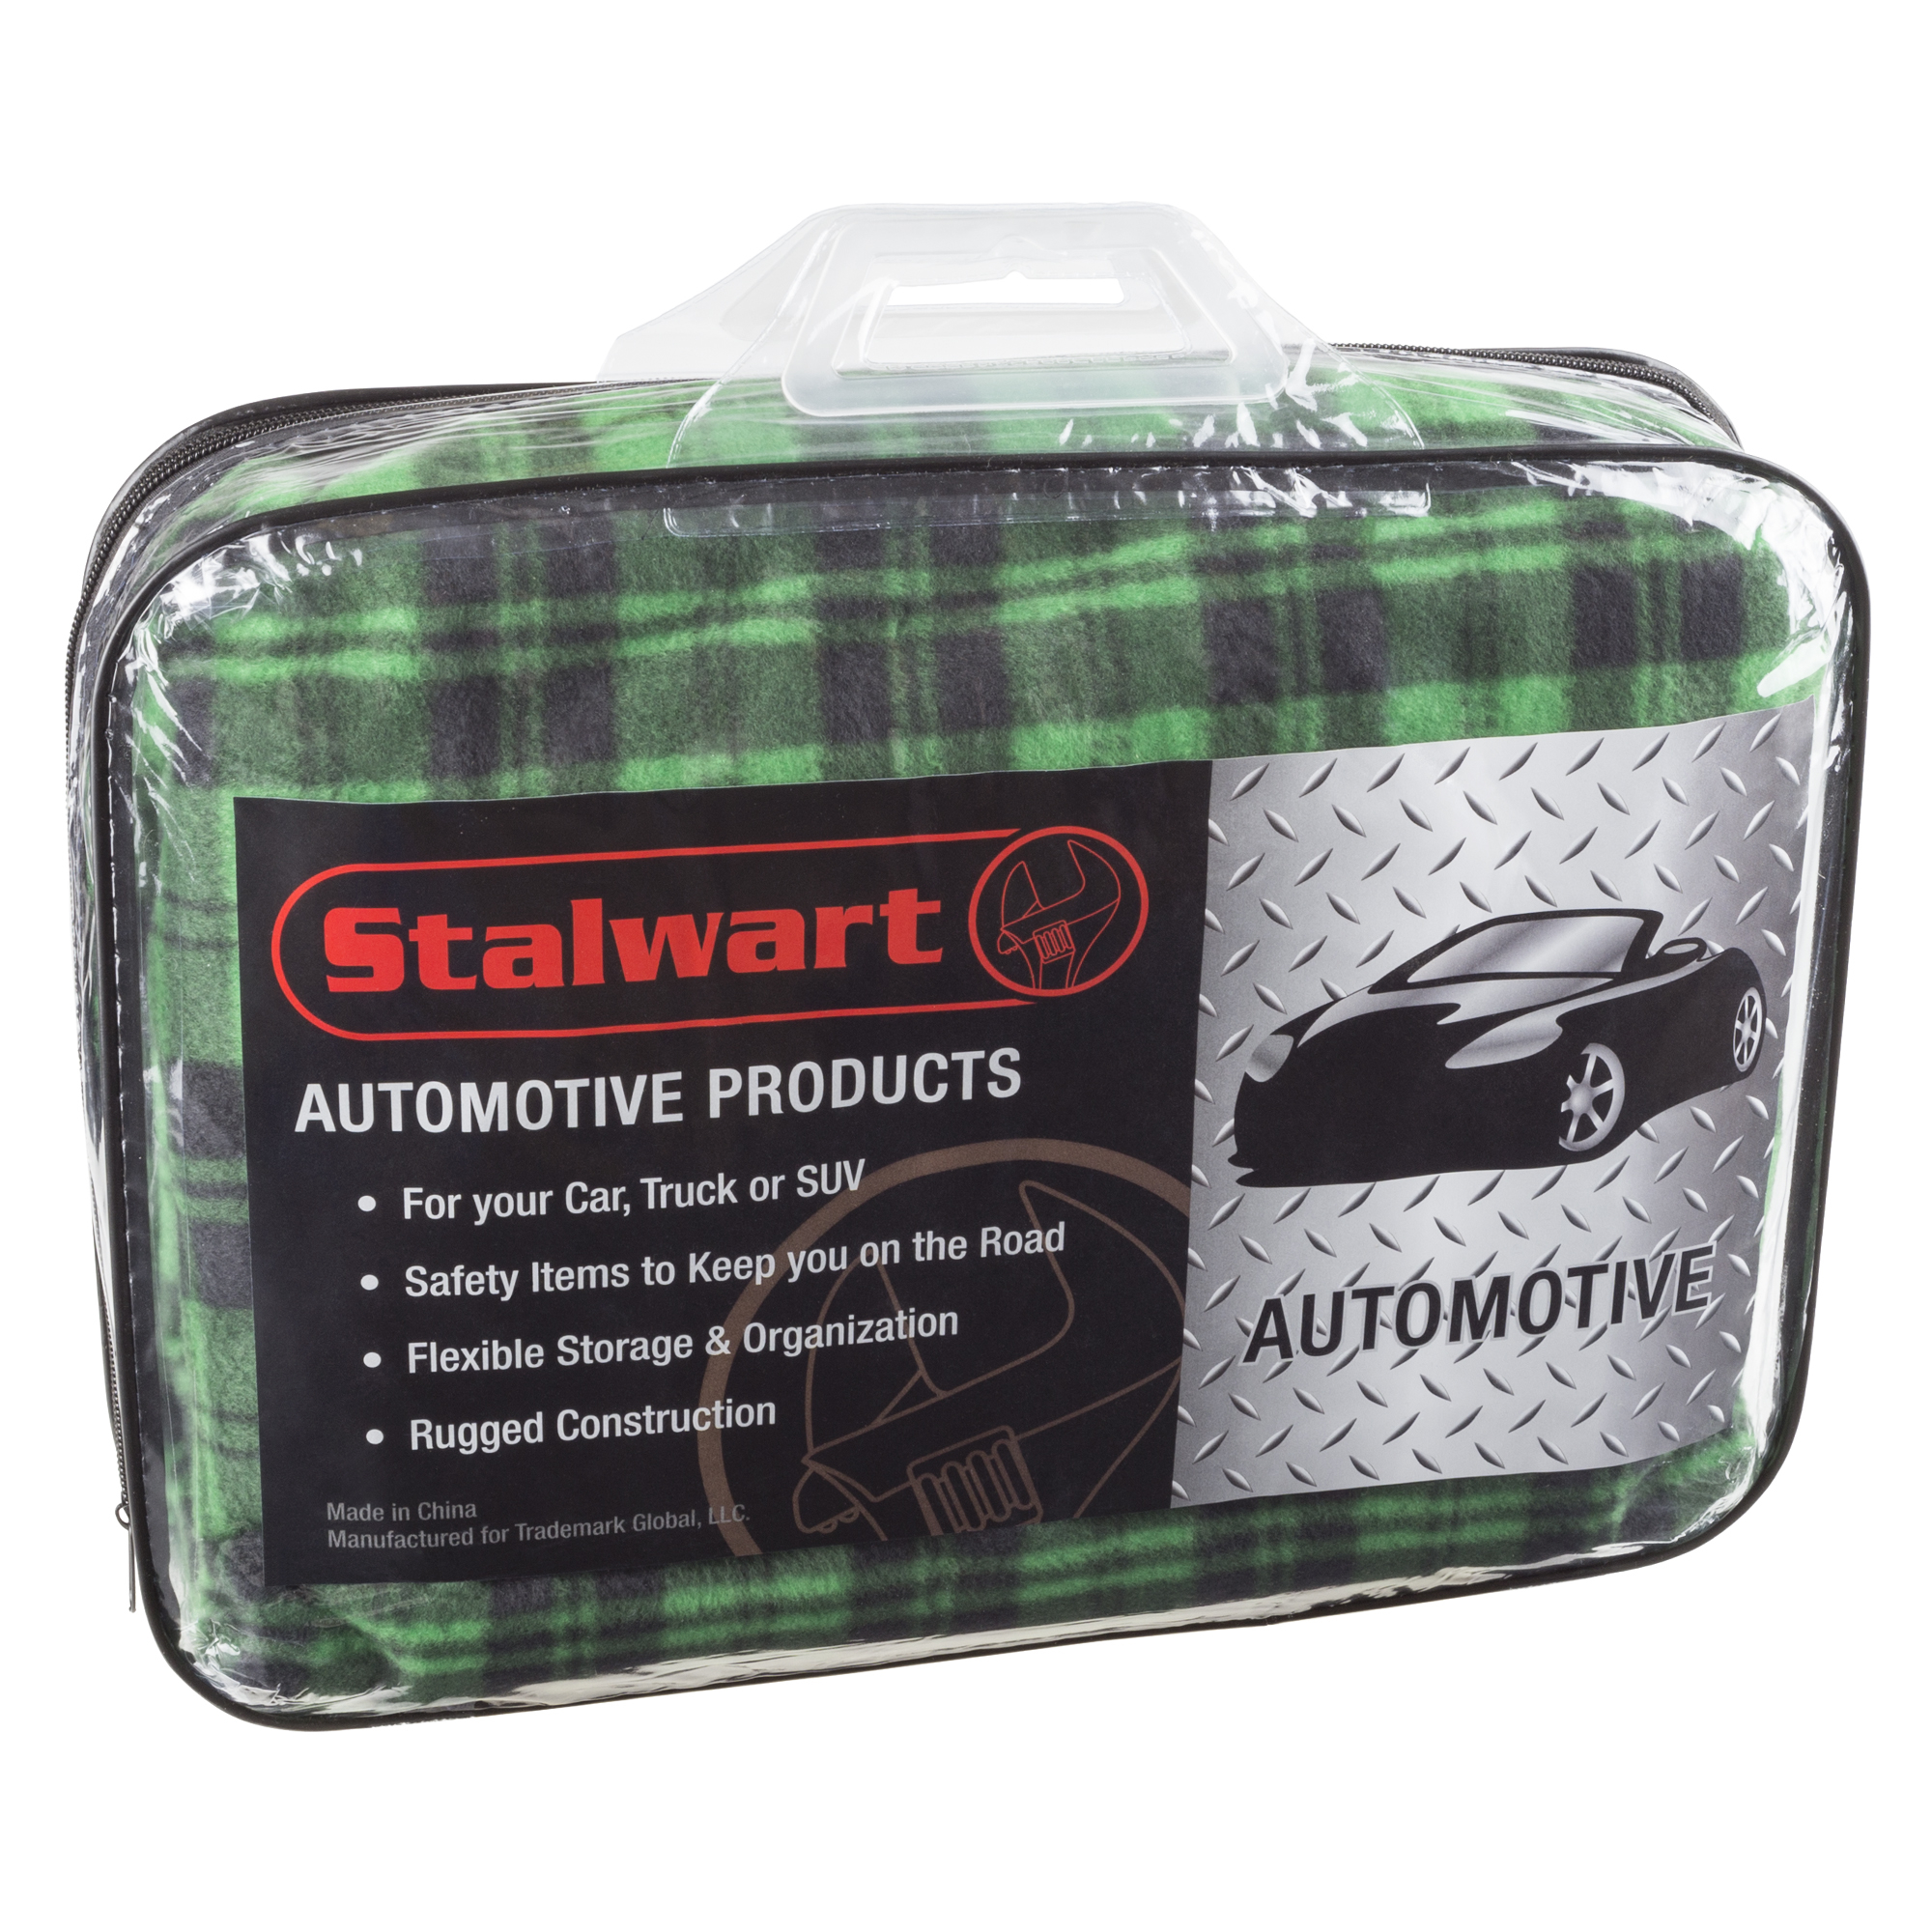 Electric Plaid Car Heated Blanket For Automobiles - Heats Up With 12 Volts Green